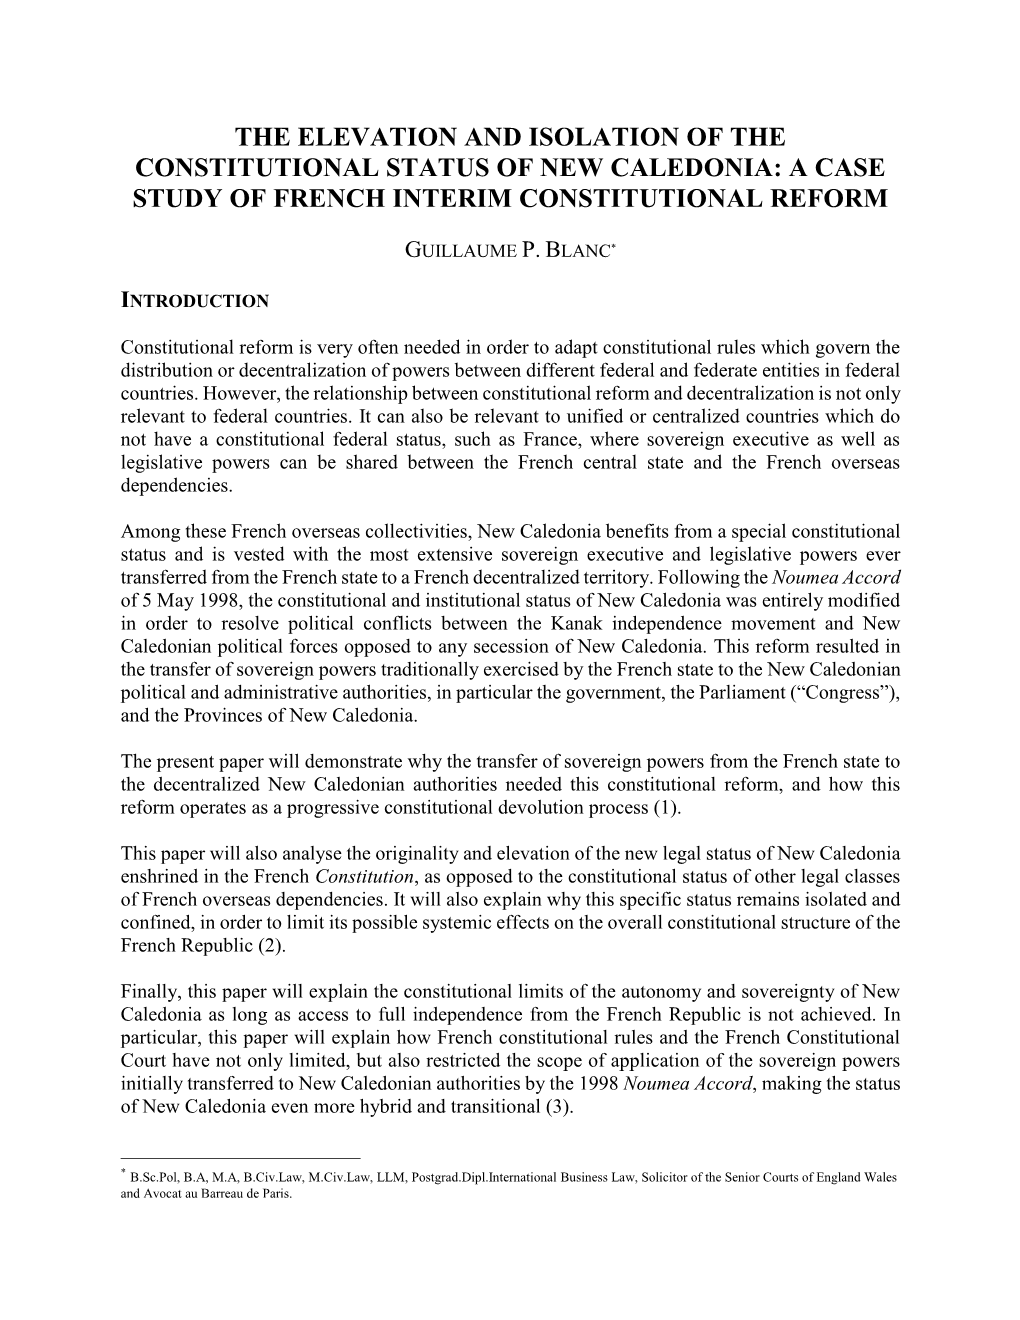 The Elevation and Isolation of the Constitutional Status of New Caledonia: a Case Study of French Interim Constitutional Reform